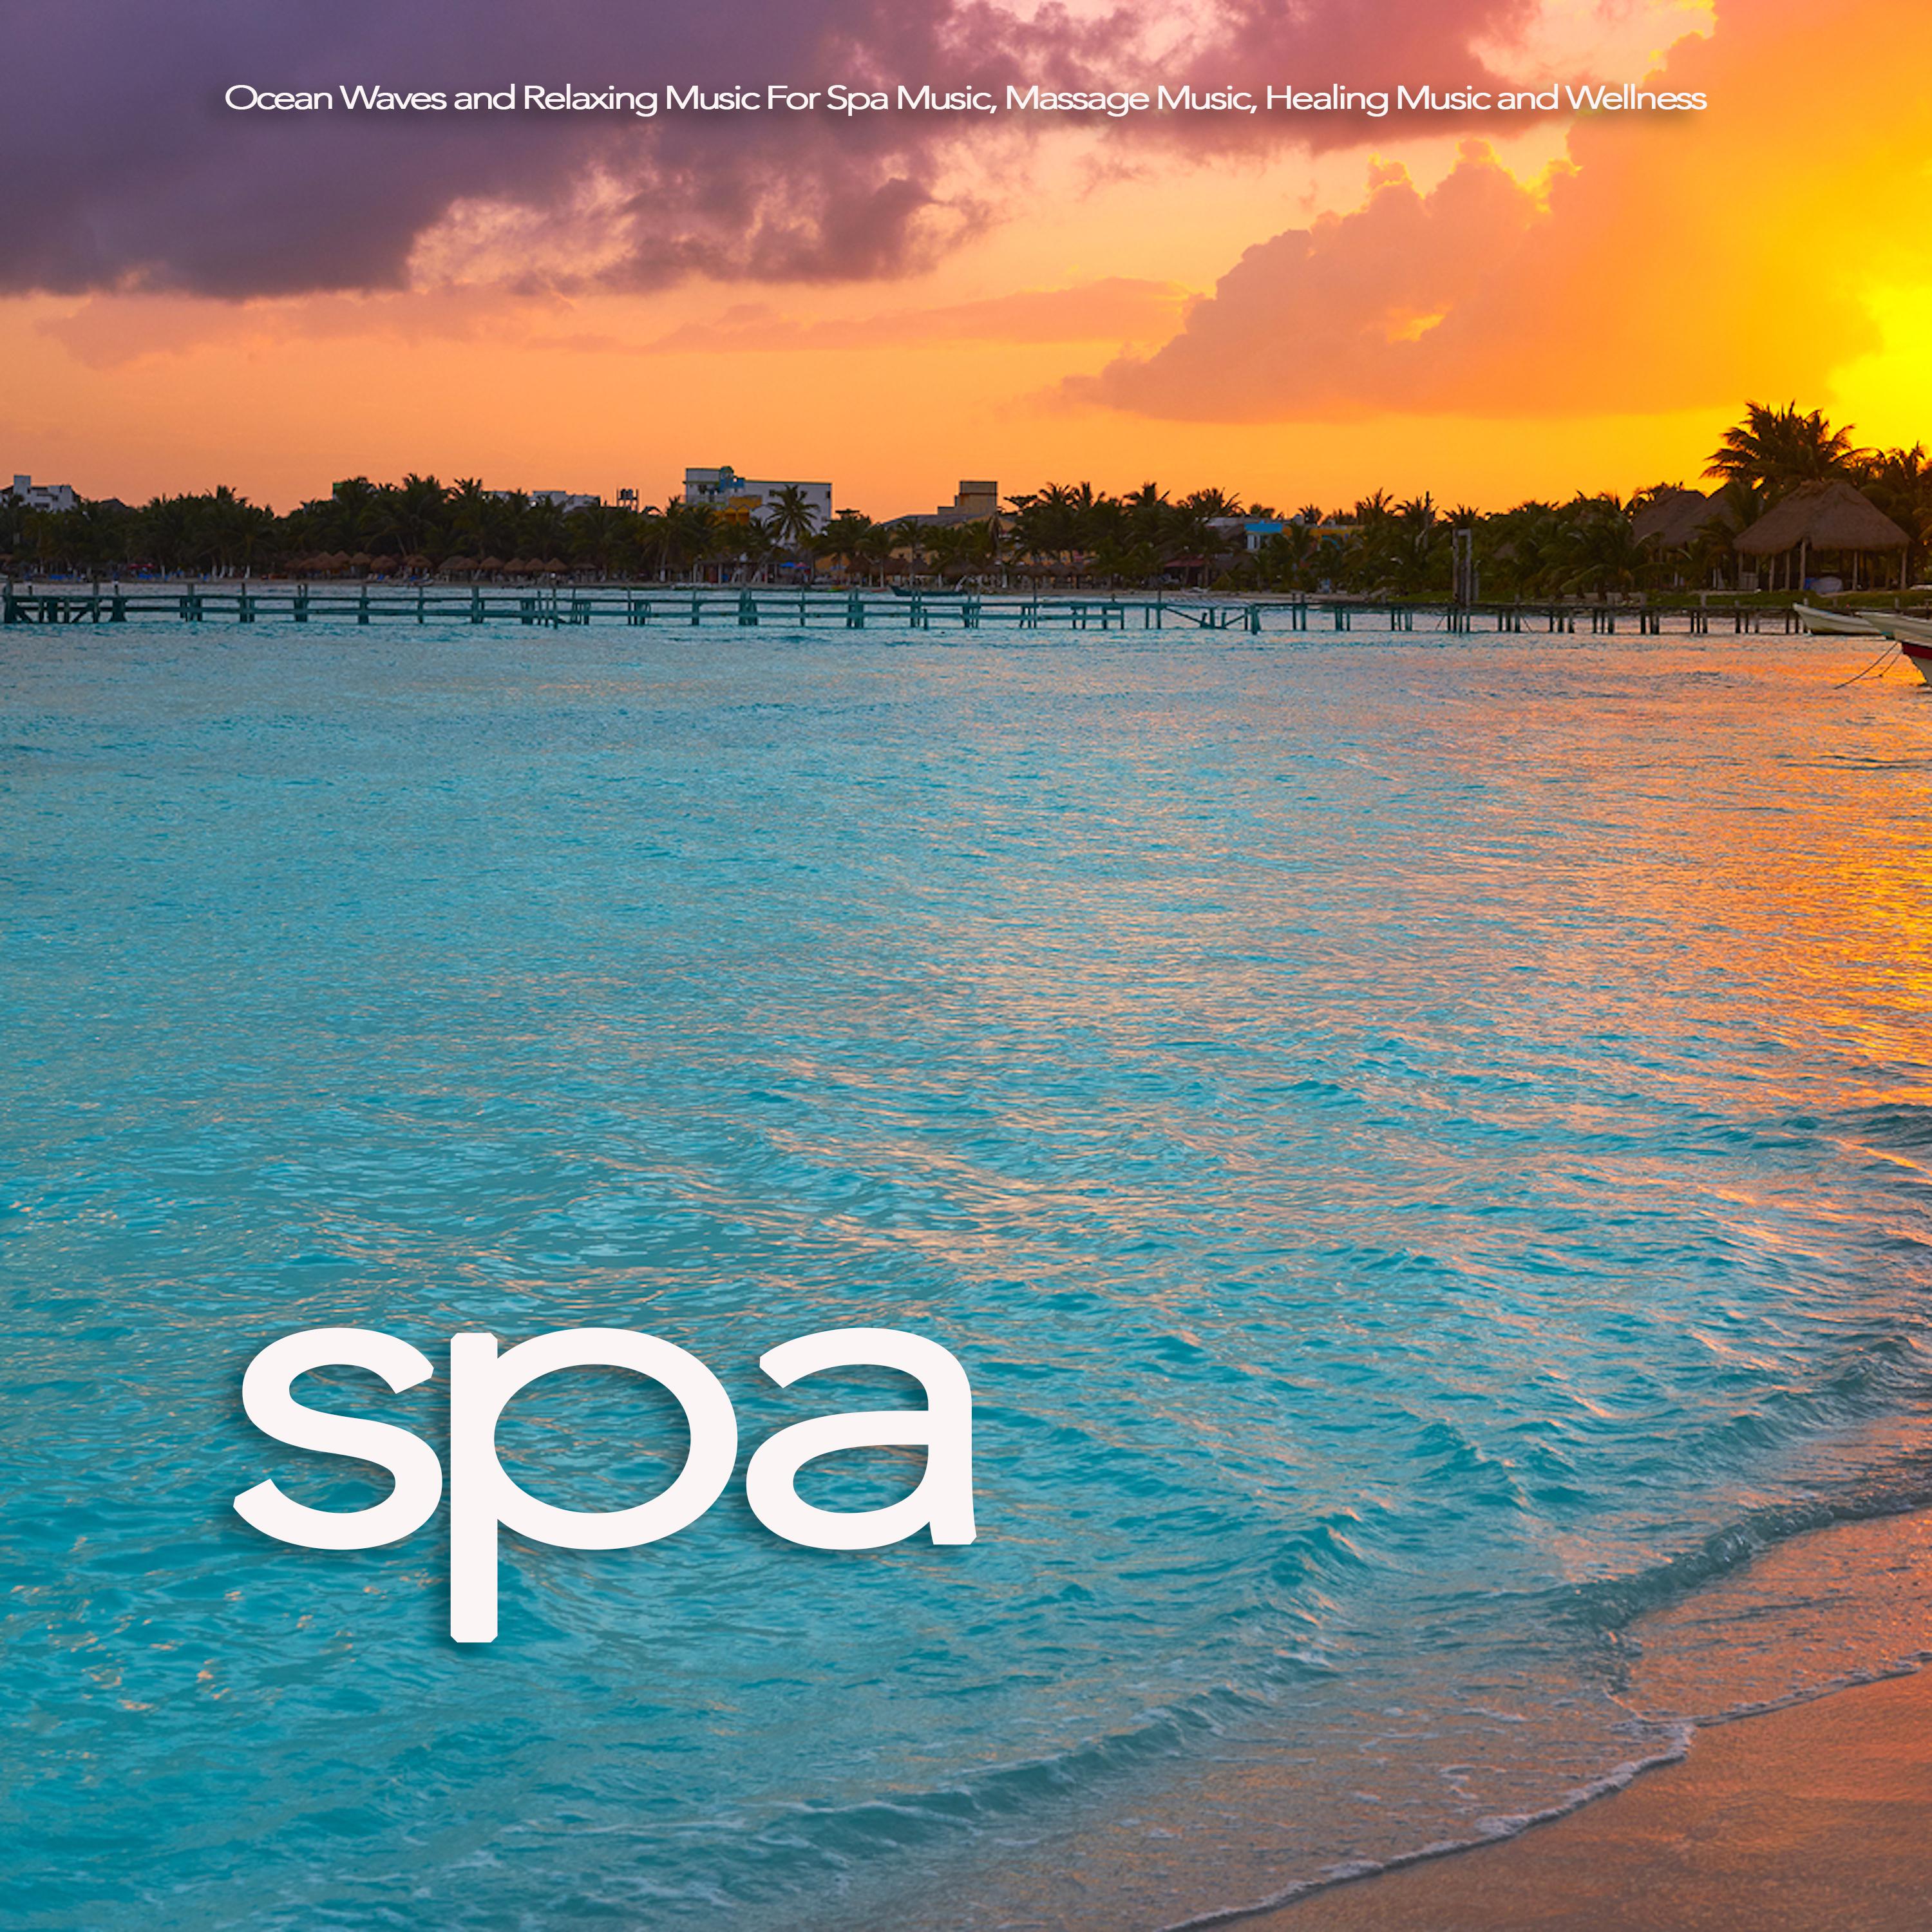 Spa: Ocean Waves and Relaxing Music For Spa Music, Massage Music, Healing Music and Wellness